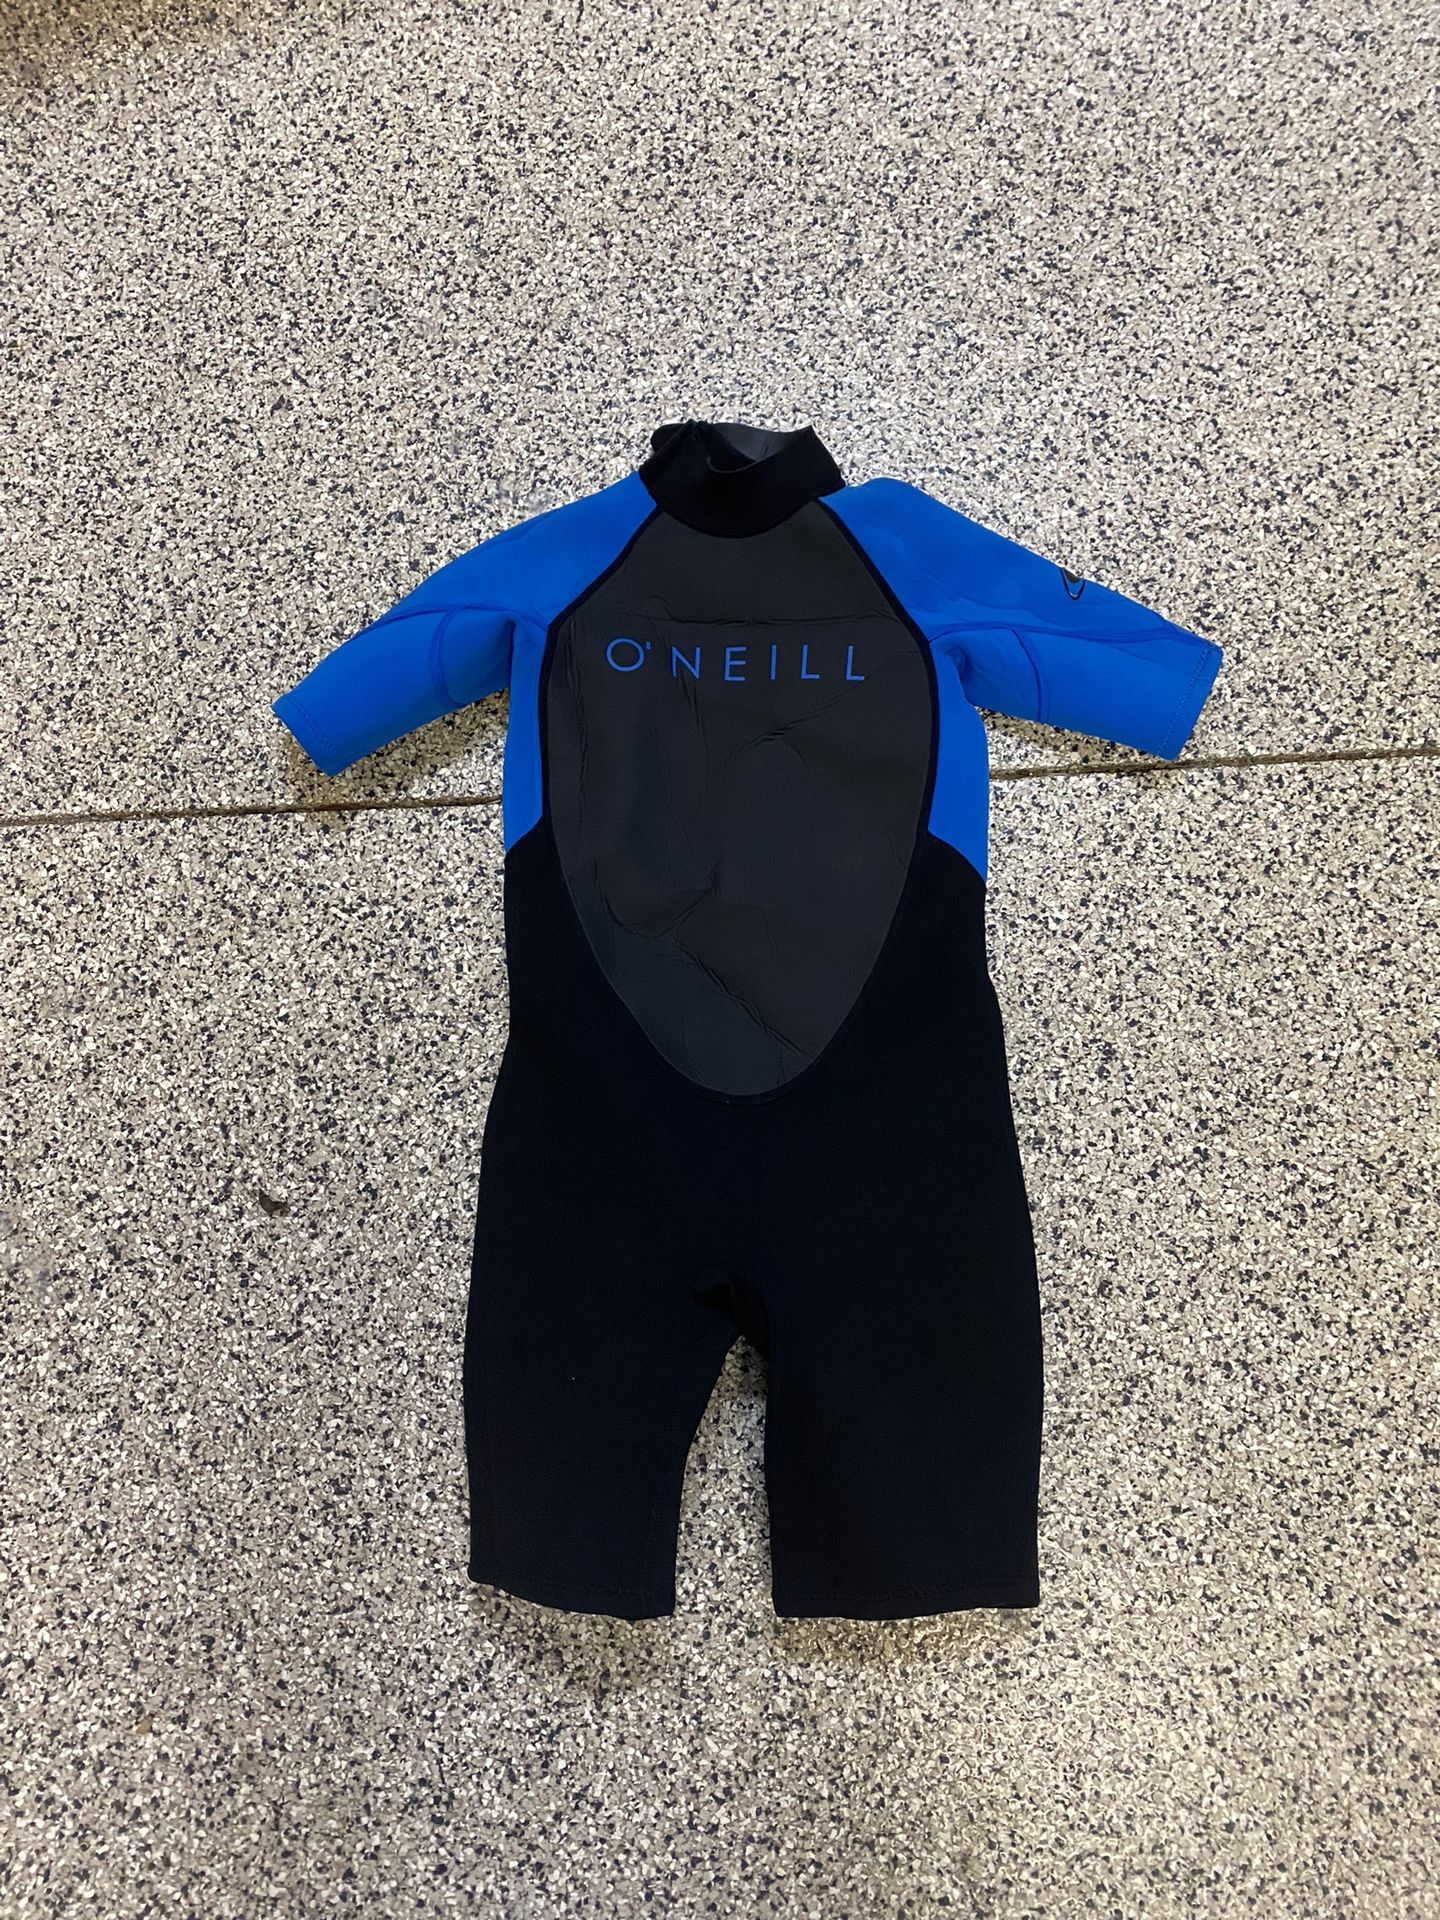 Used Twice - Brand New Kids Wet Suit Size 8